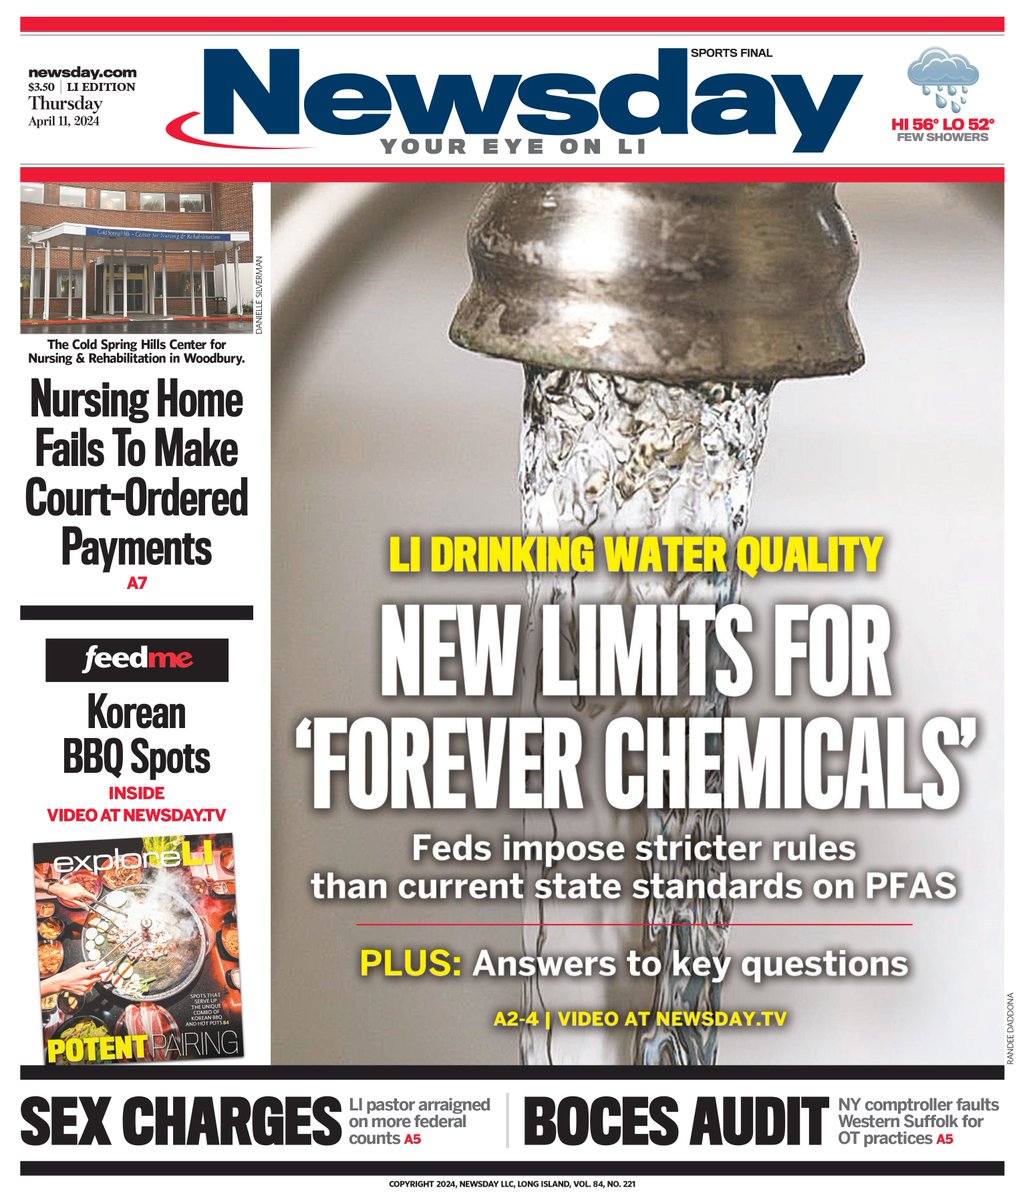 Thursday's cover: New EPA limits on PFAS 'forever chemicals' set stricter standards for Long Island drinking water buff.ly/49vwWaw